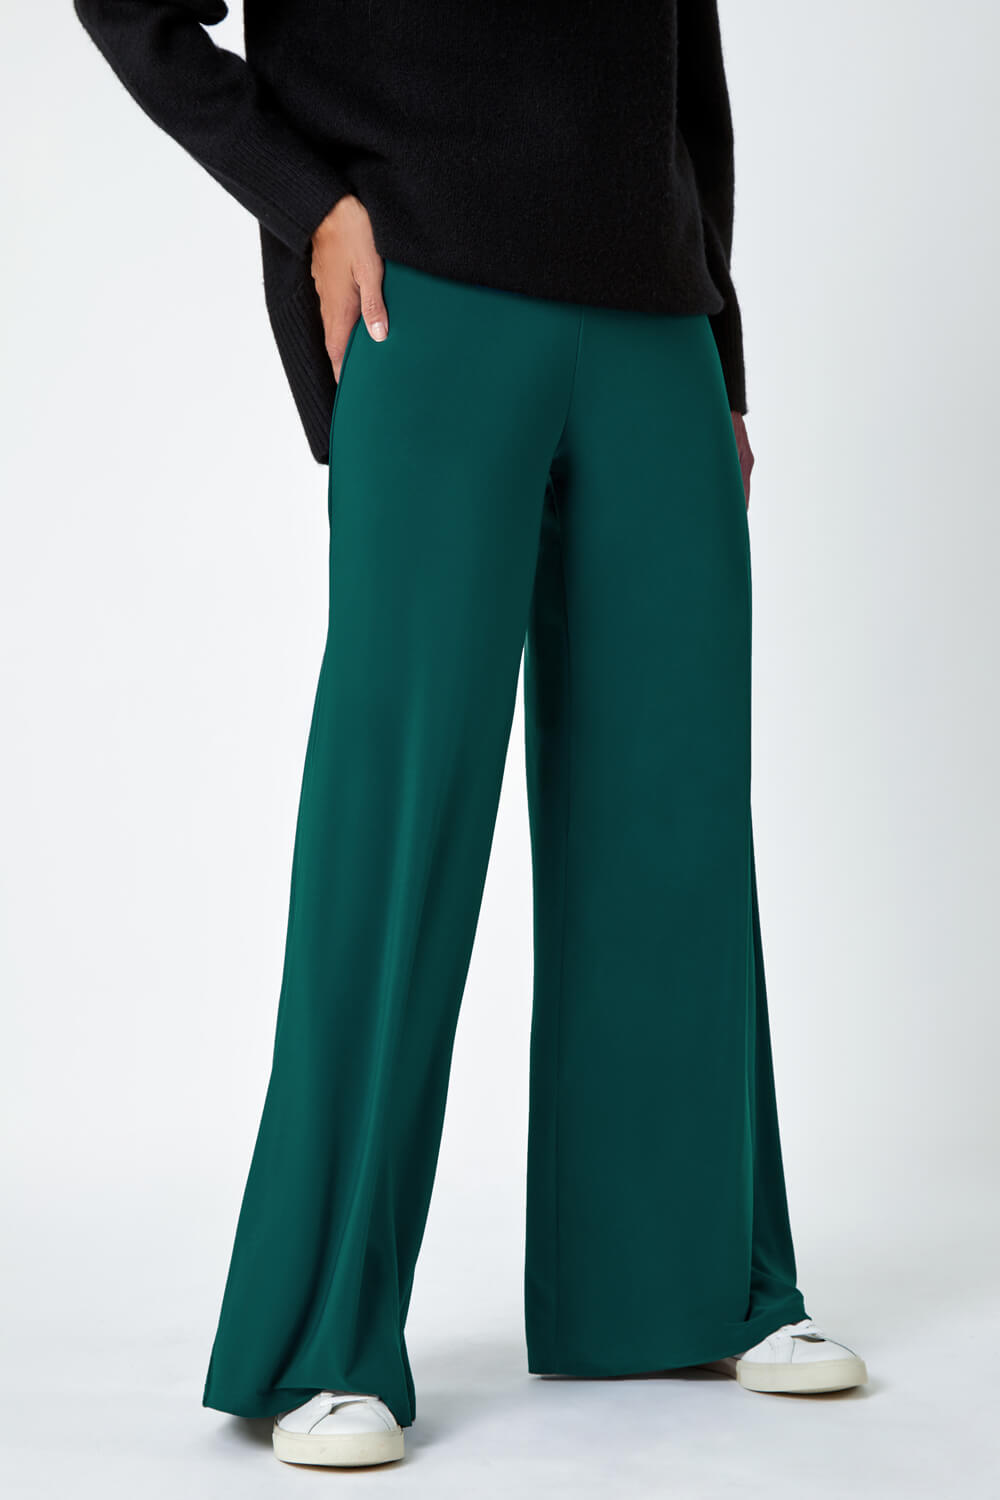 Teal Wide Leg Stretch Trousers, Image 4 of 5